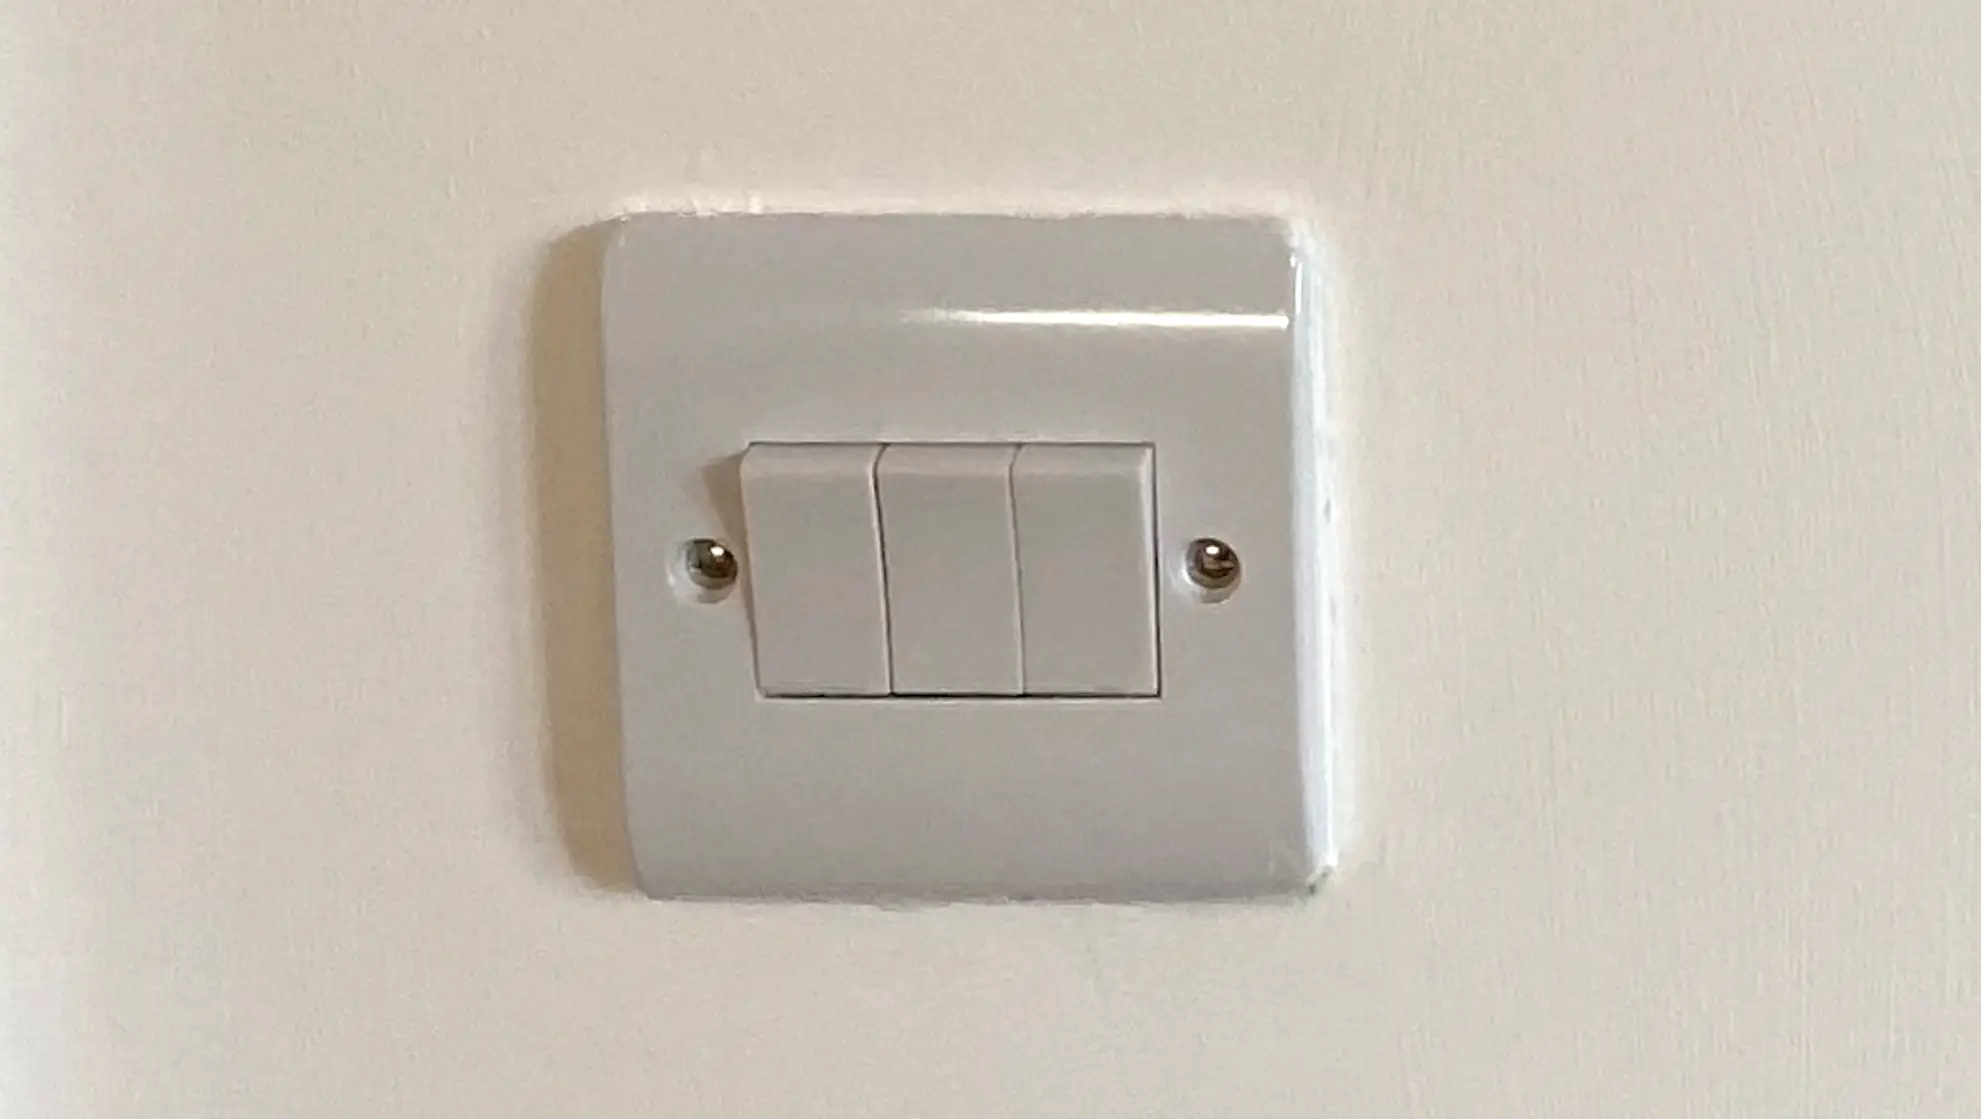 Estimates for install or fix a light switch near CF44